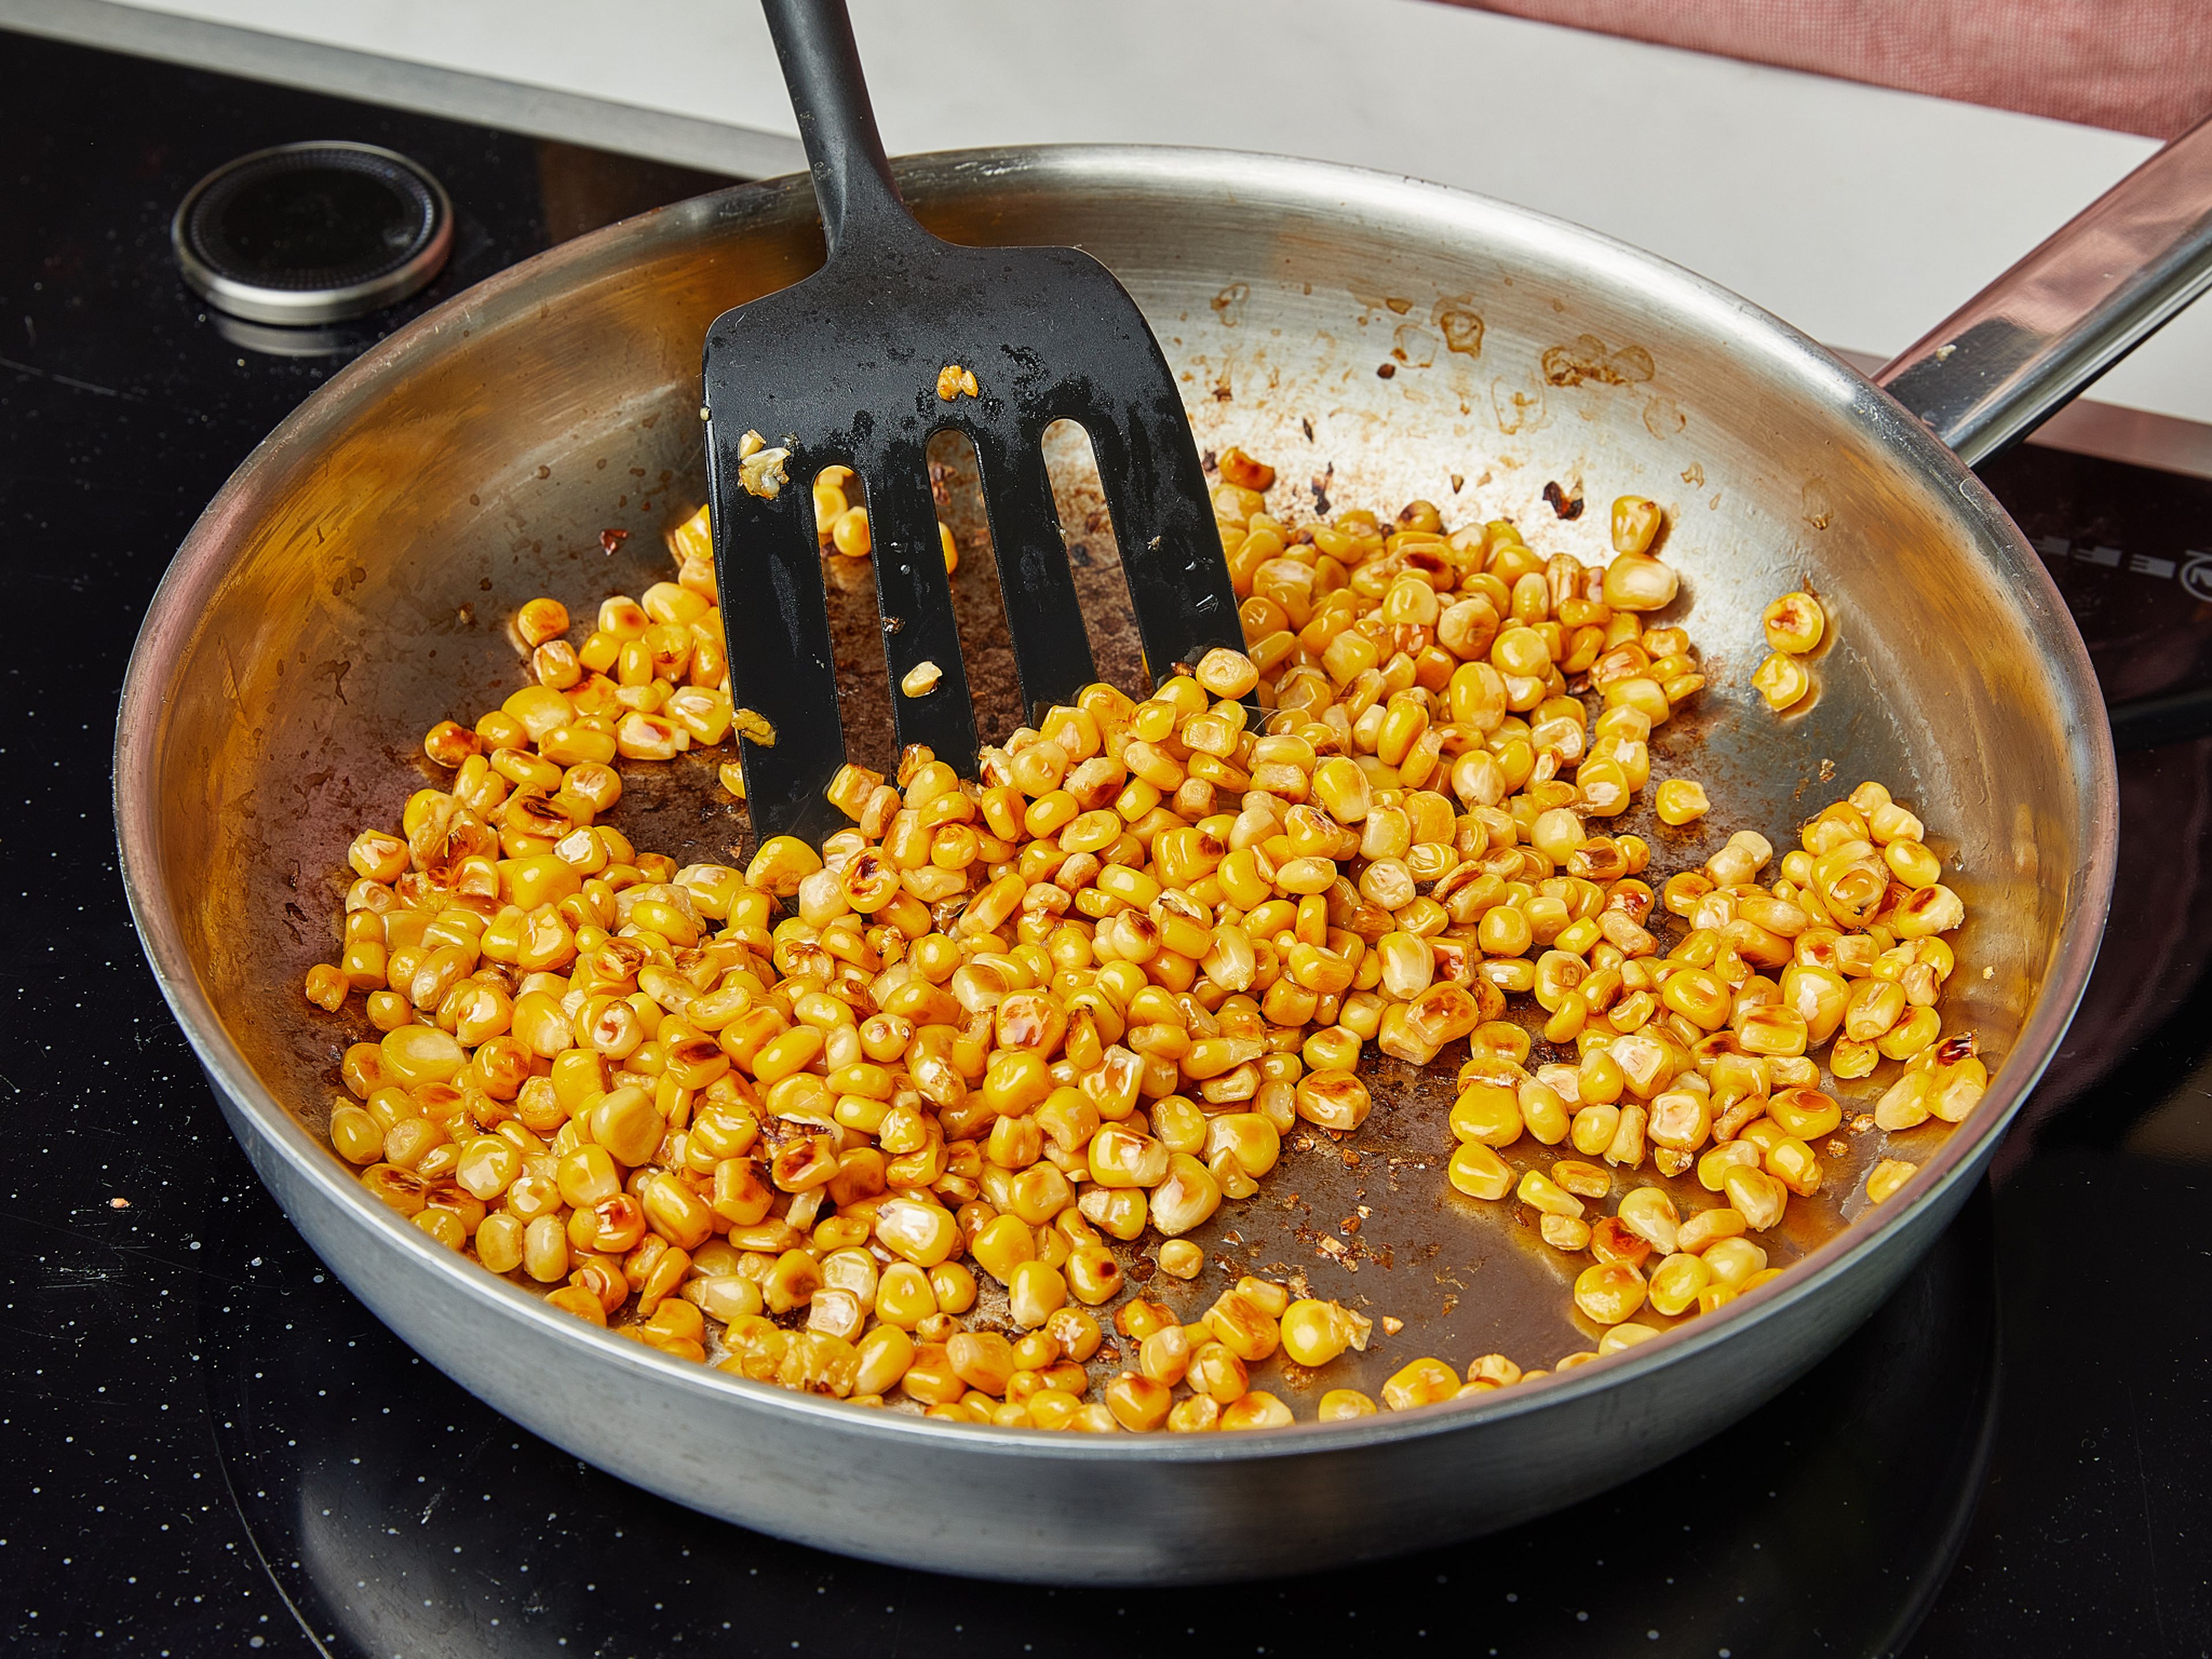 In a frying pan, add corn kernels, heat over medium-low heat until the water is evaporated. Then add olive oil, turn up the heat, and fry the corn kernels until browned or charred. Remove and set aside.